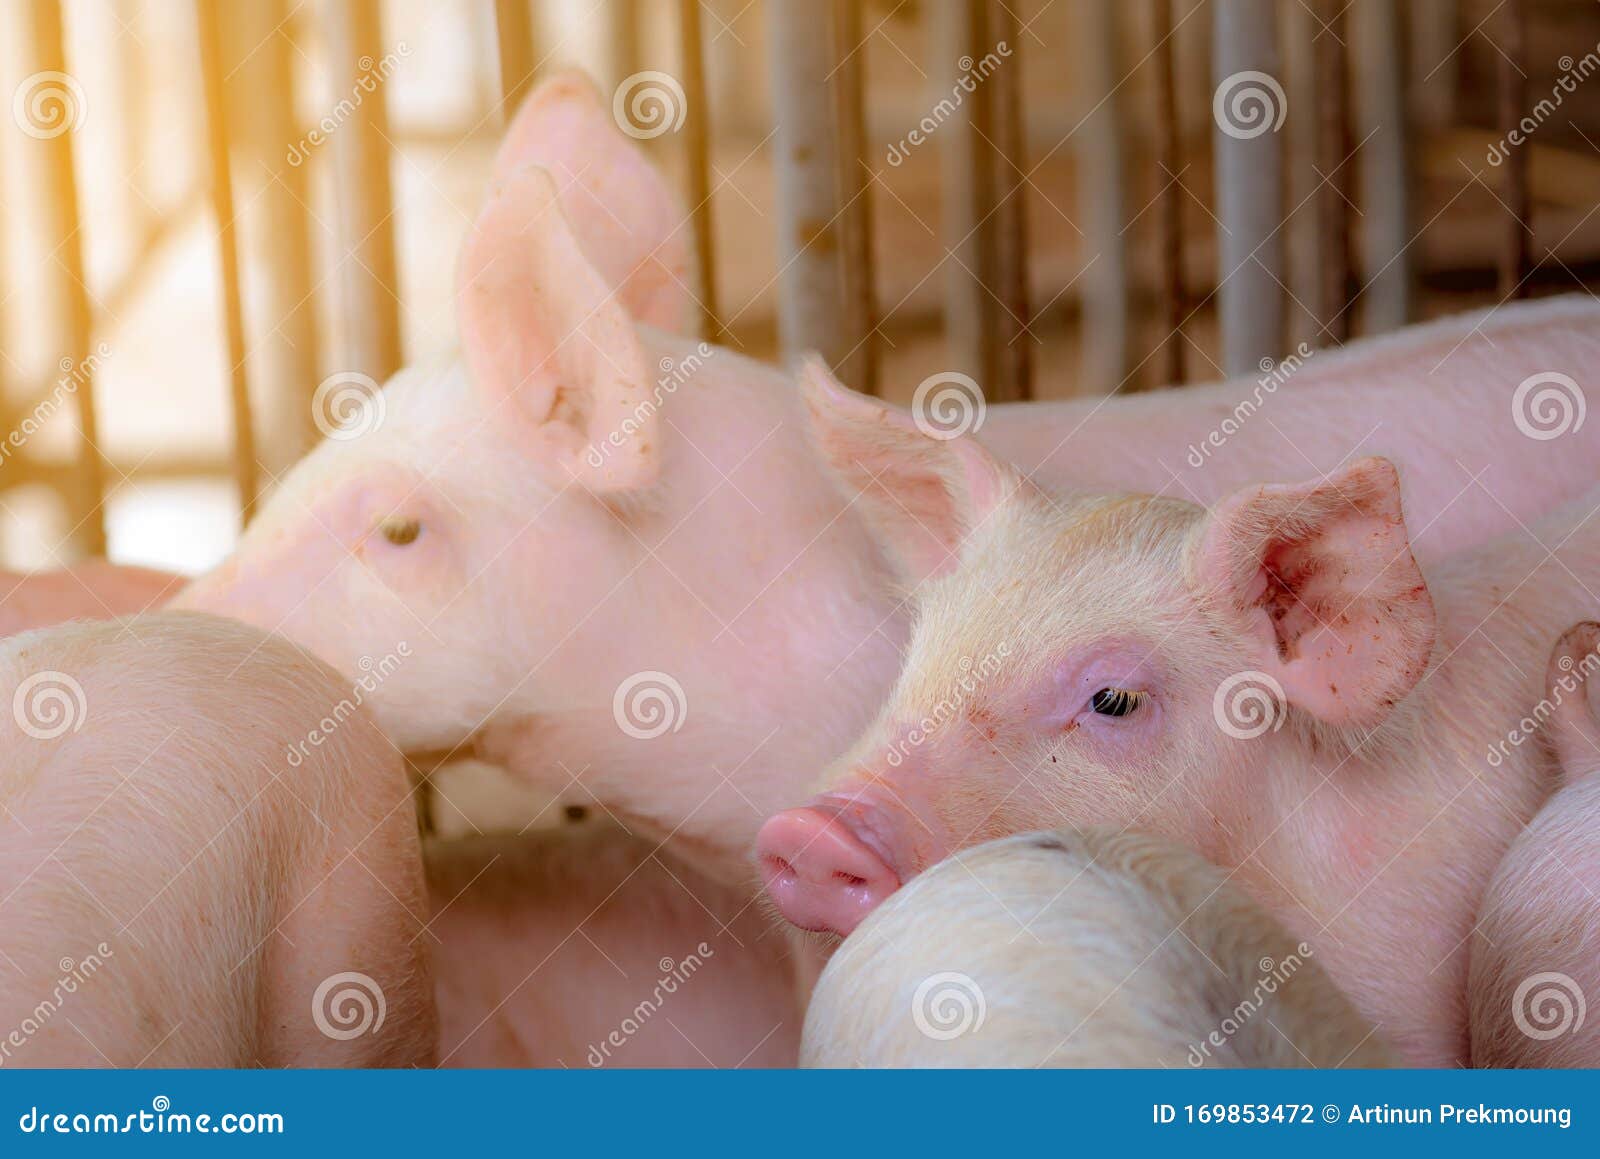 little pig in farm. small pink piglet. african swine fever and swine flu concept. livestock farming. pork meat industry. healthy